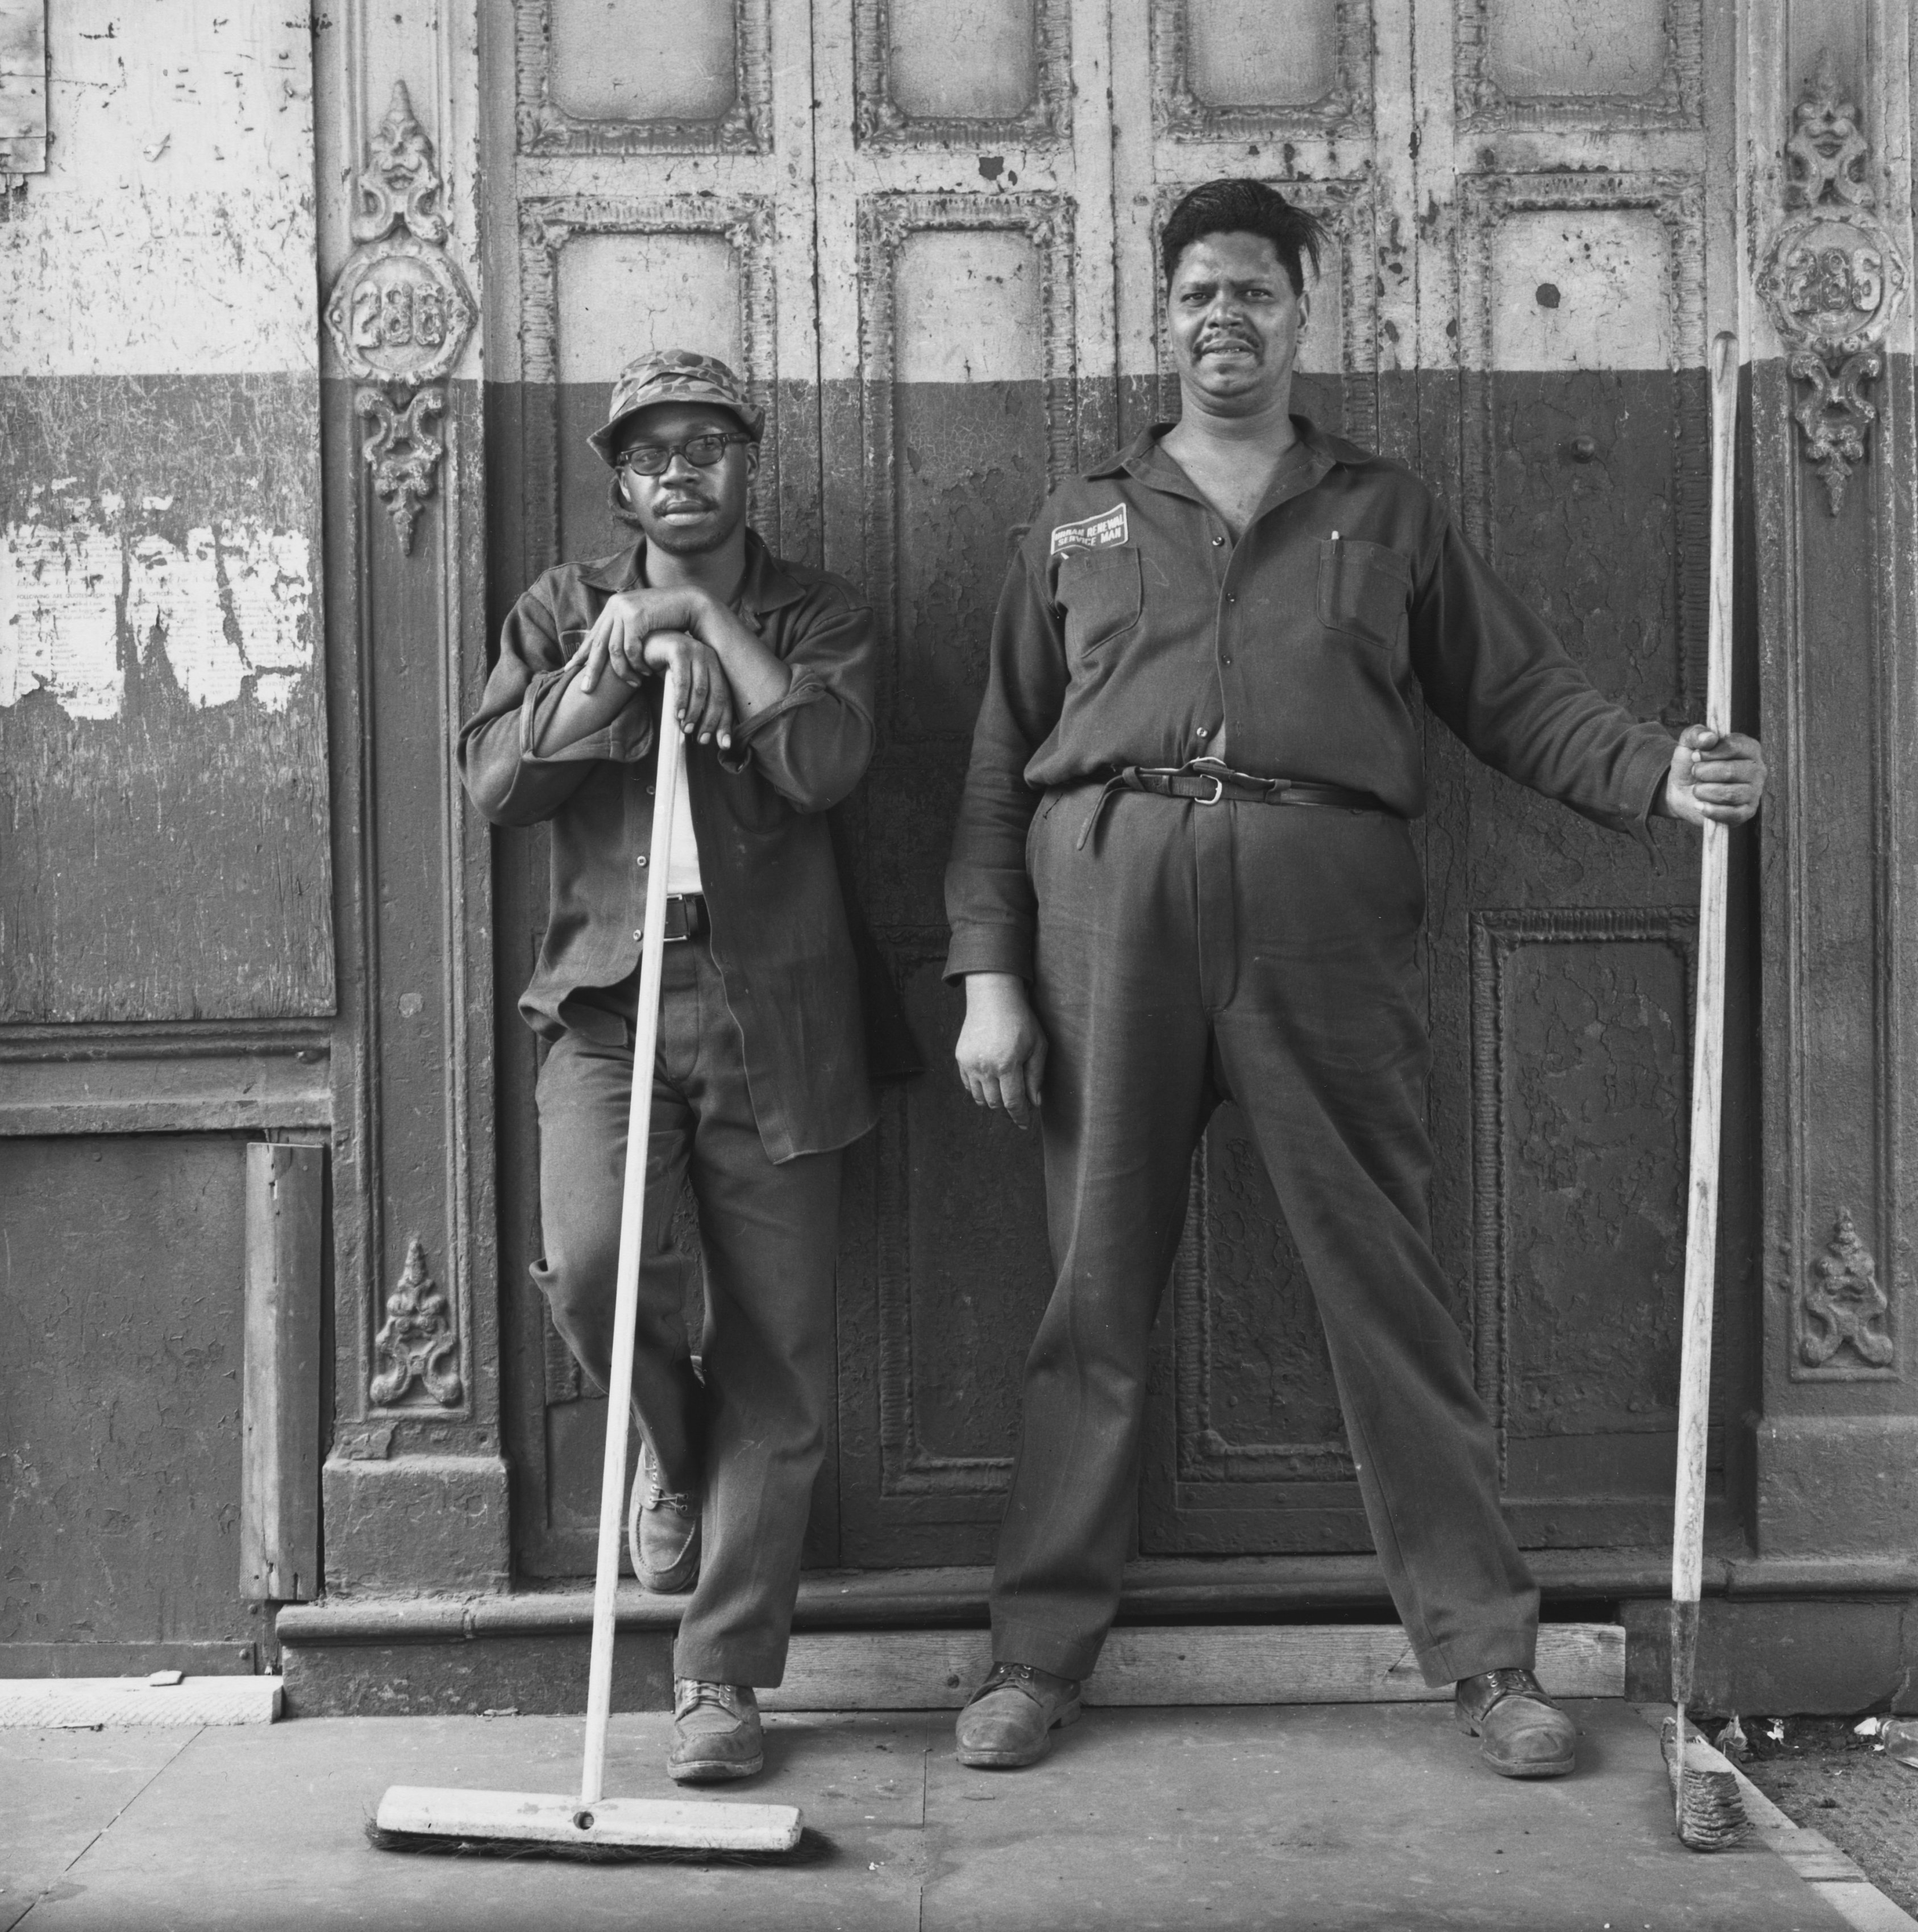 Eddie Grant and Cleveland Sims. Washington Street Maintenance Men from the New York City Department of Urban Renewal